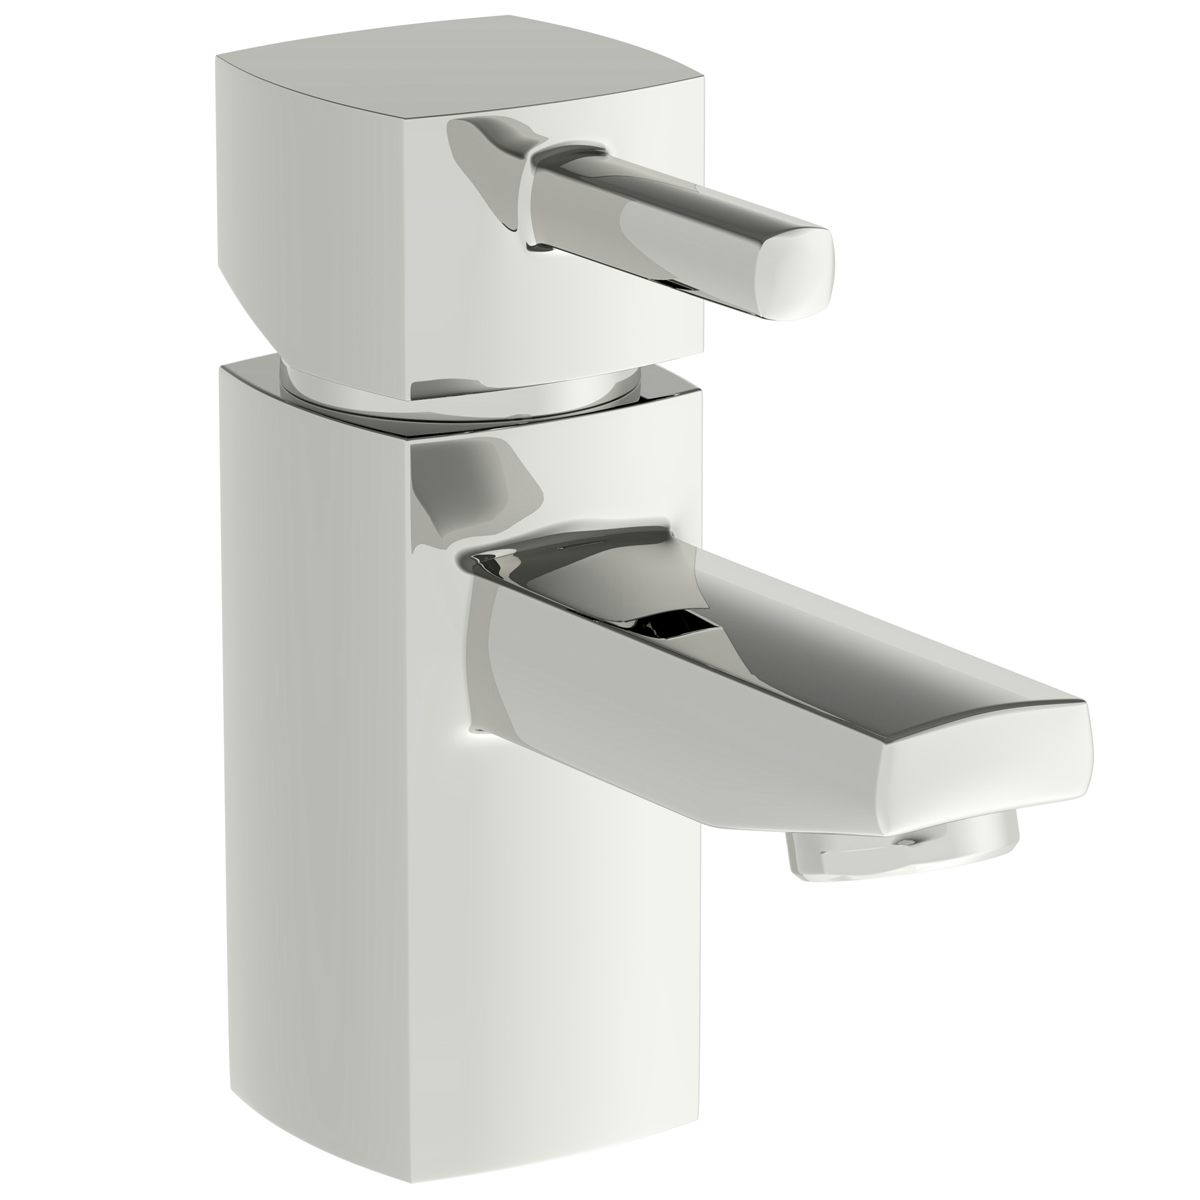 Orchard Derwent cloakroom basin mixer tap with slotted waste